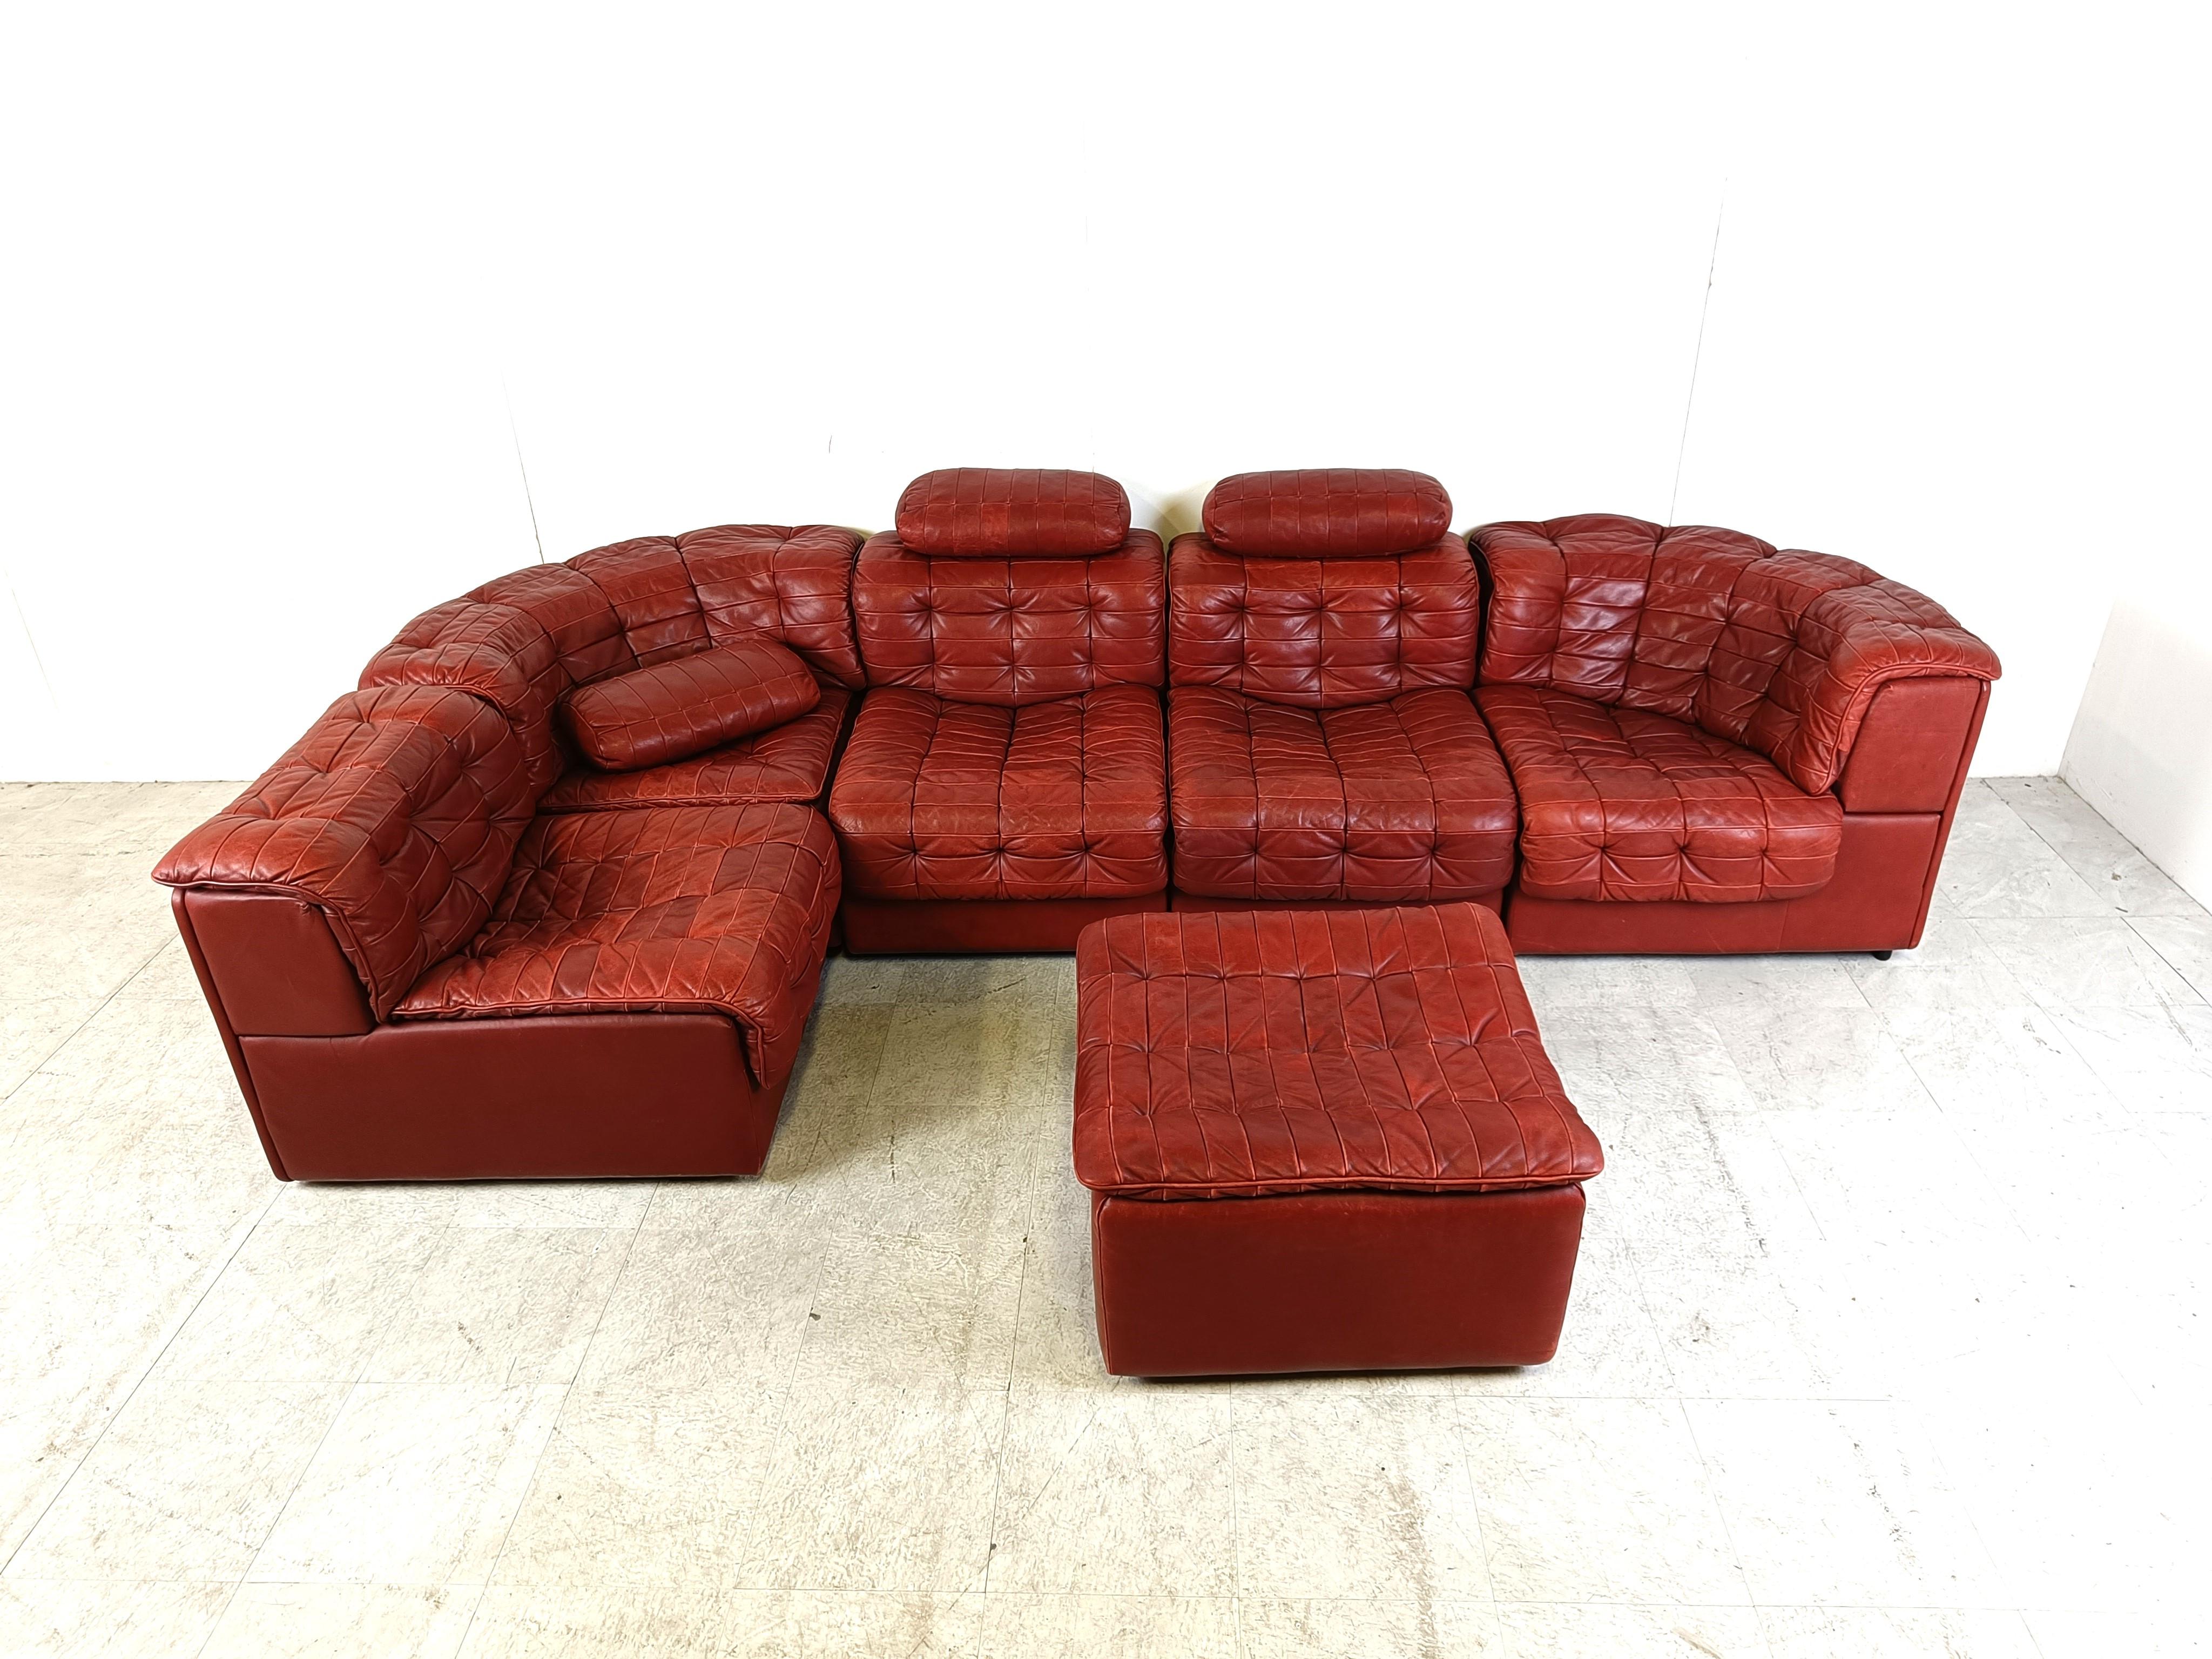 Mid century red patchwork leather modular sofa by Desede.

Desede produced high quality leather sofas and is still producing today.

This DS11 model is quite rare to find especially in this red colour.

It comes complete with ottoman and three